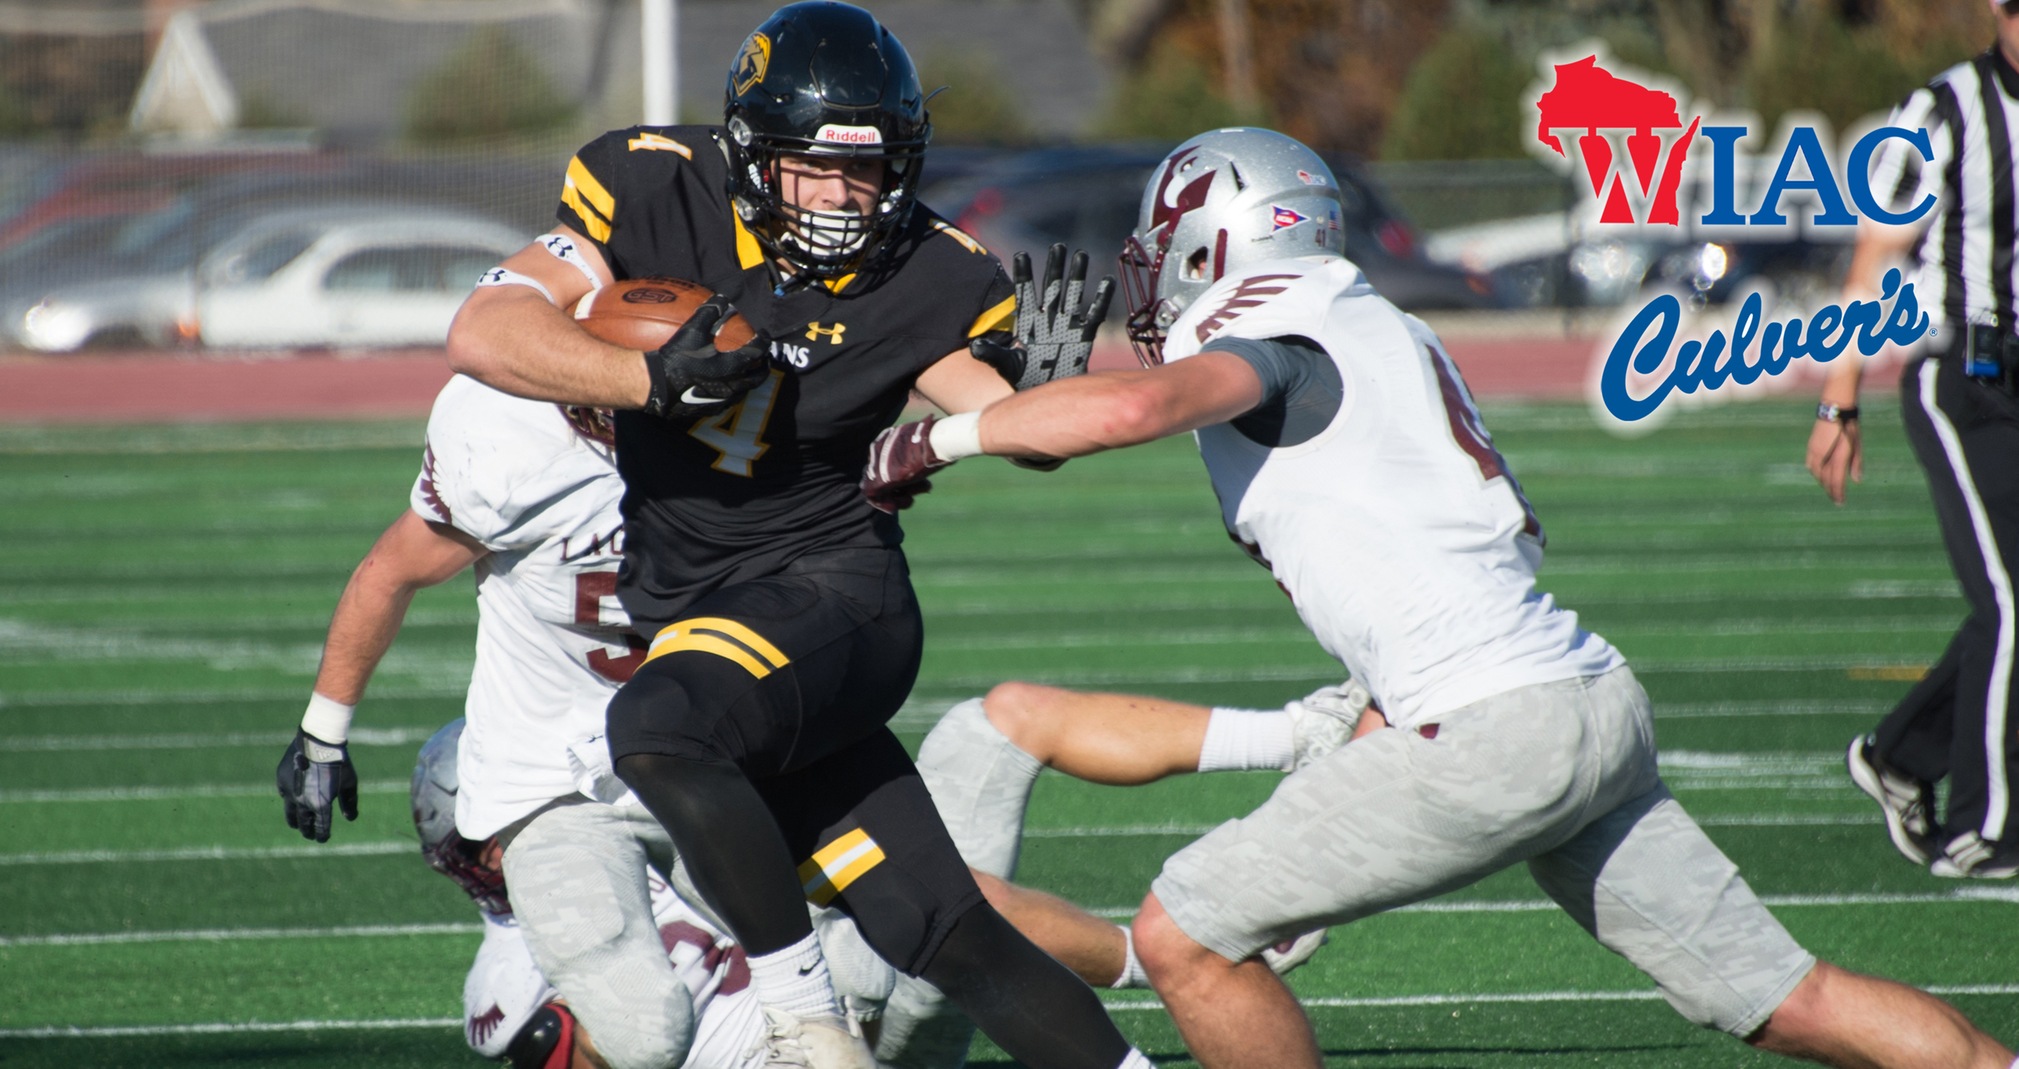 Dylan Hecker has rushed for 2,811 yards and a school-record 48 touchdowns during his UW-Oshkosh career.